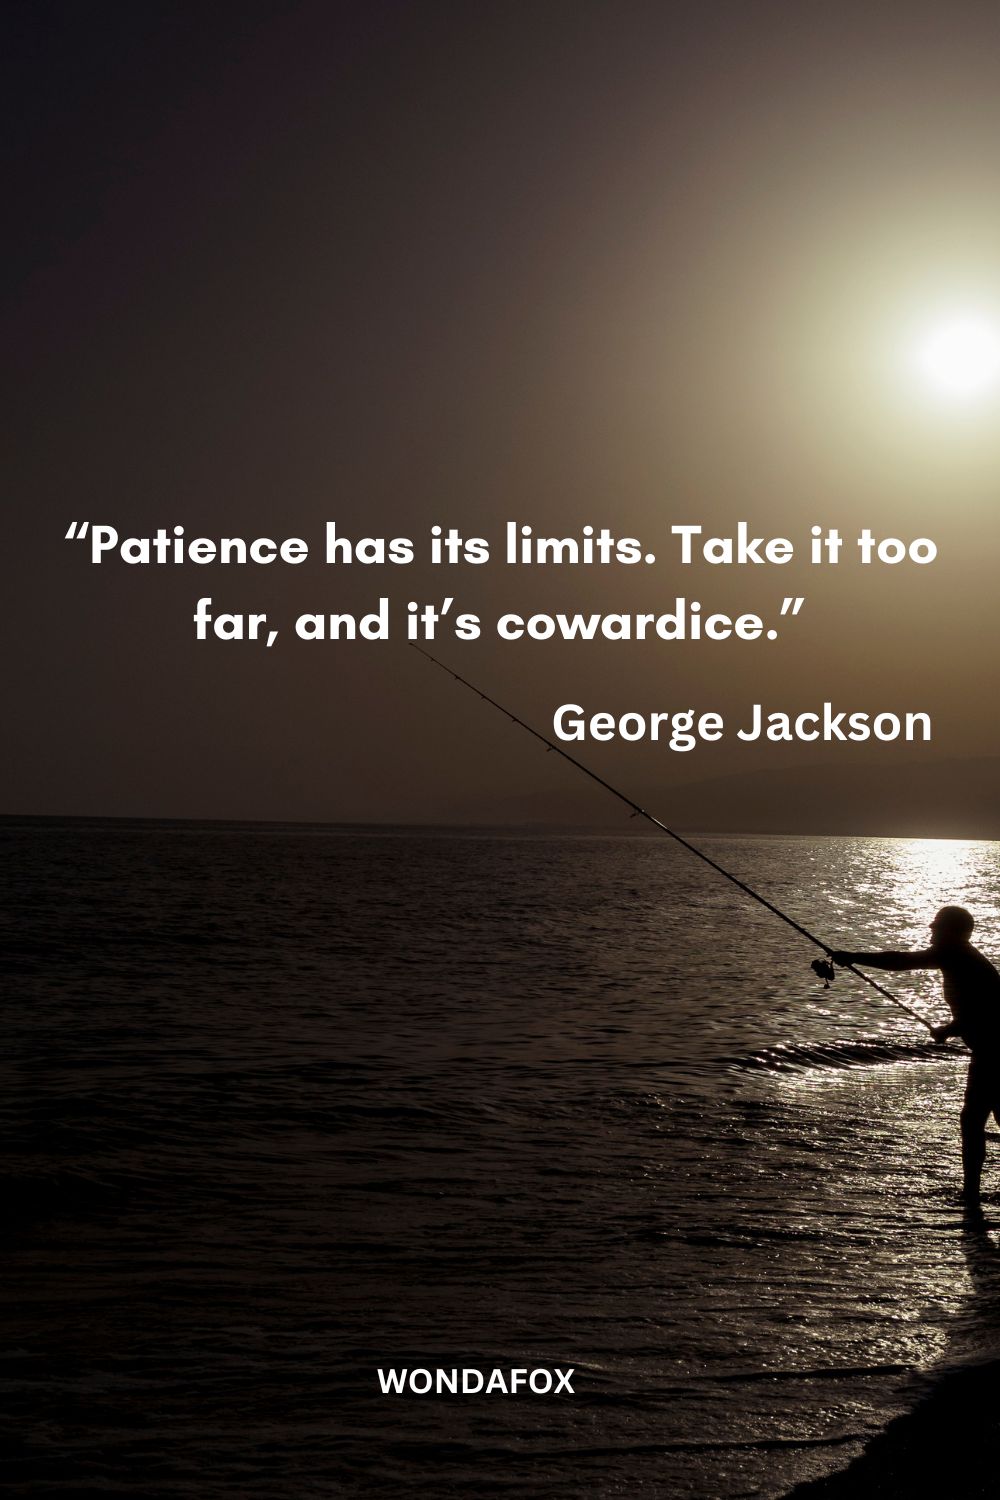 “Patience has its limits. Take it too far, and it’s cowardice.”
George Jackson